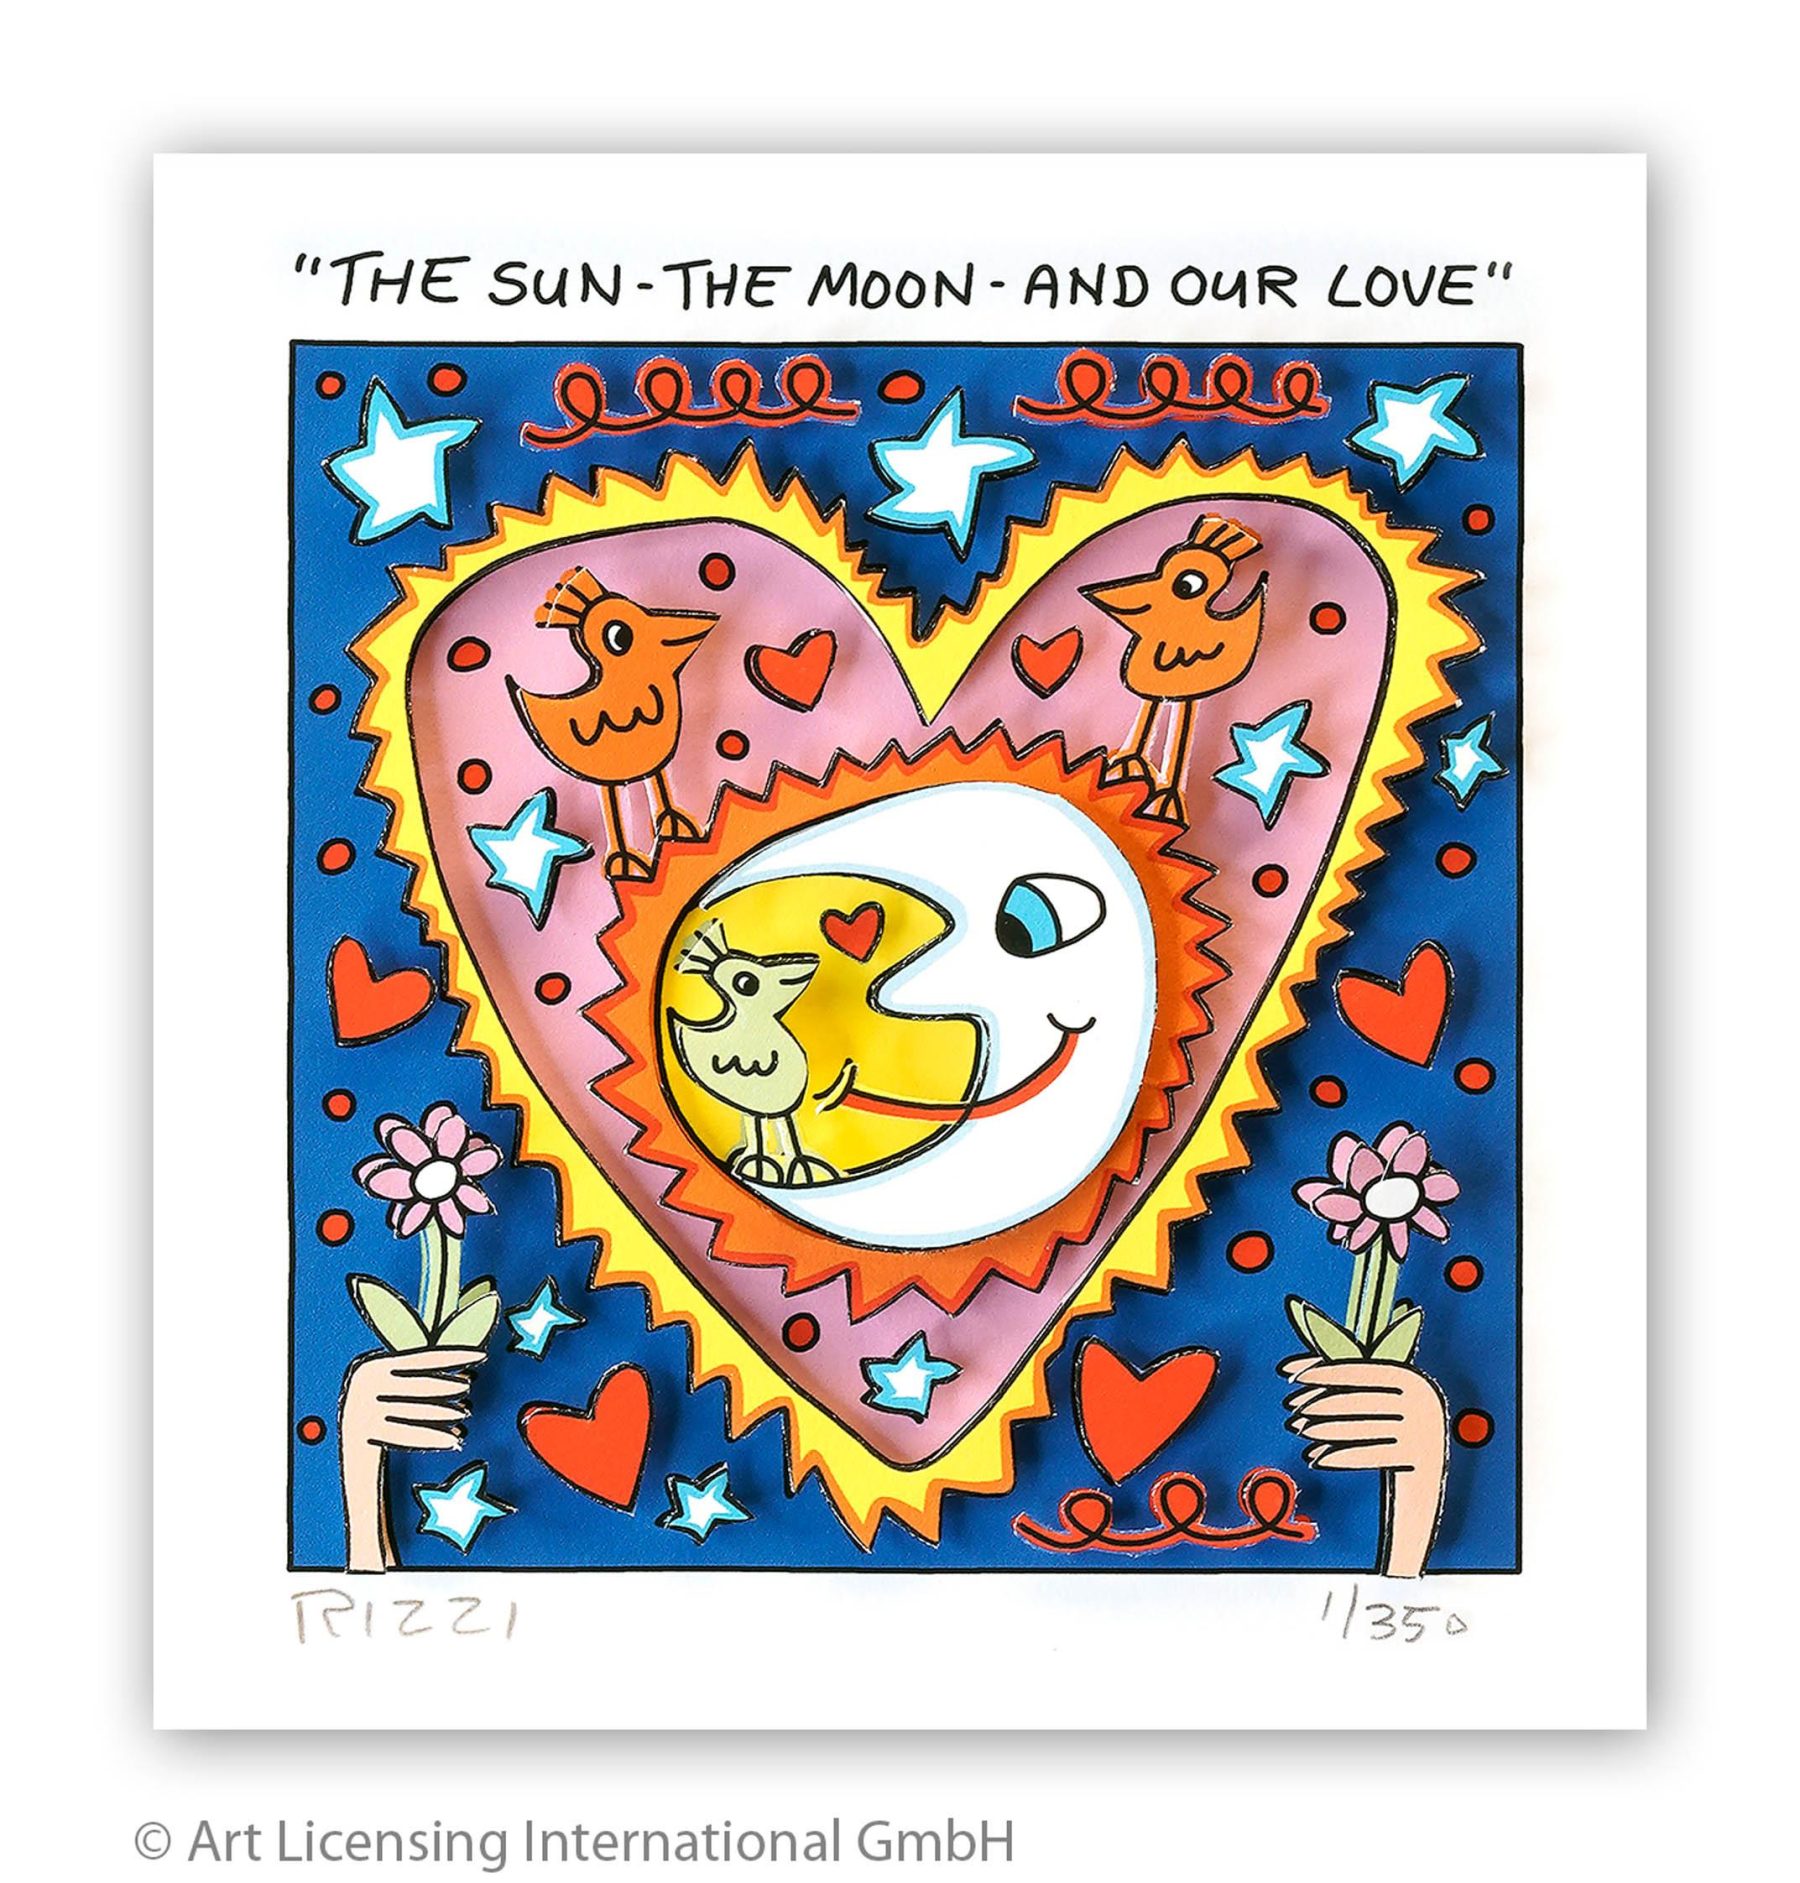 The sun - the moon - and our love - Rizzi, James - k-2304RIZ1